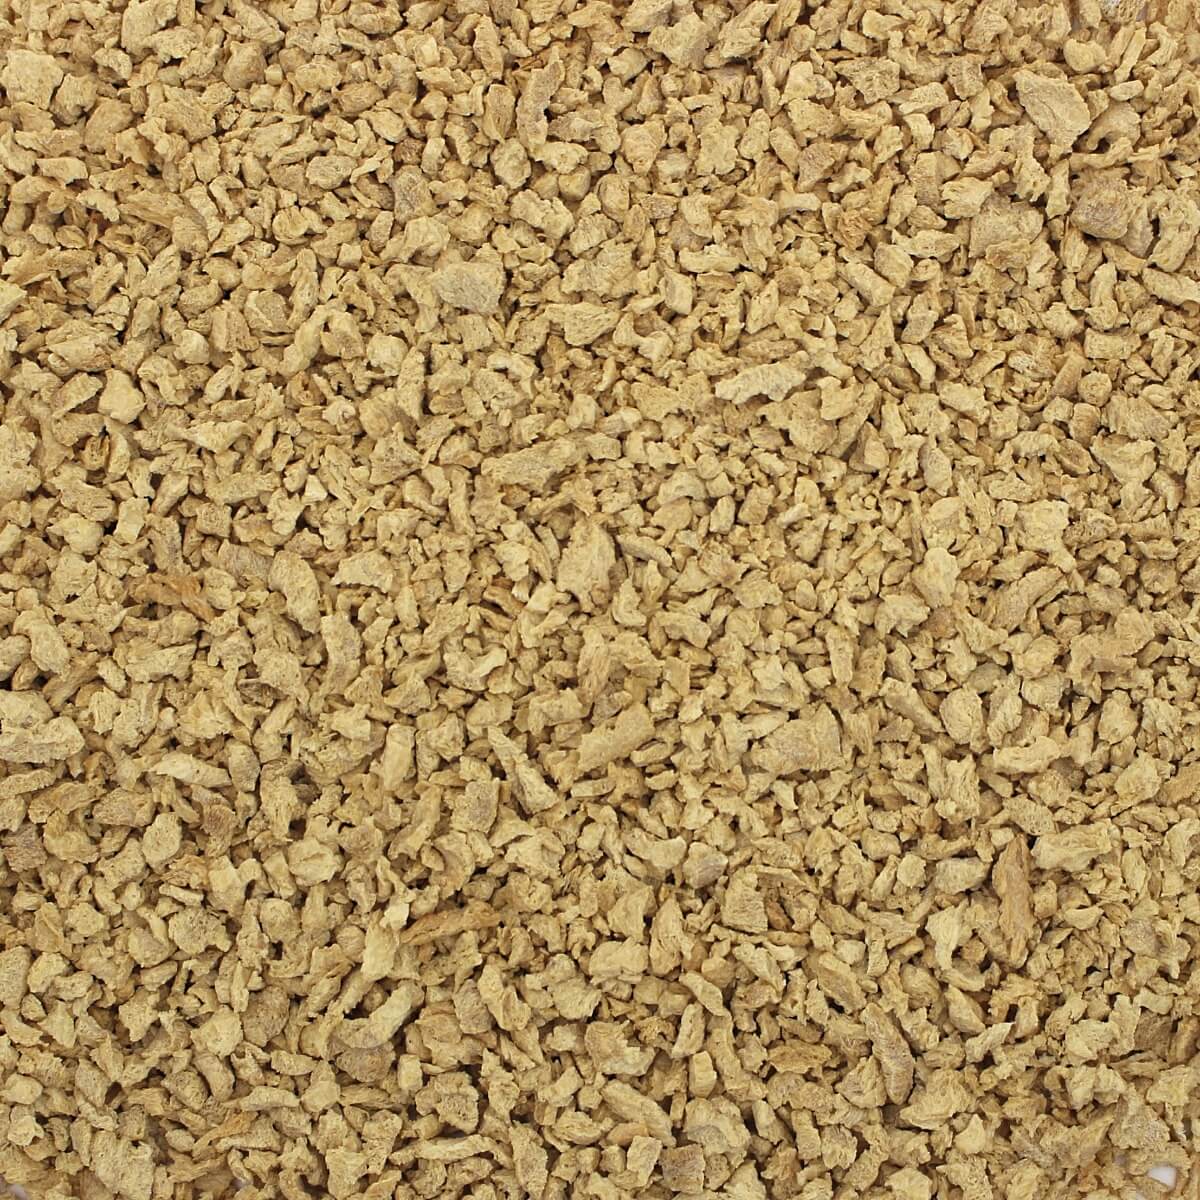 A close up of a pile of unflavored granules.